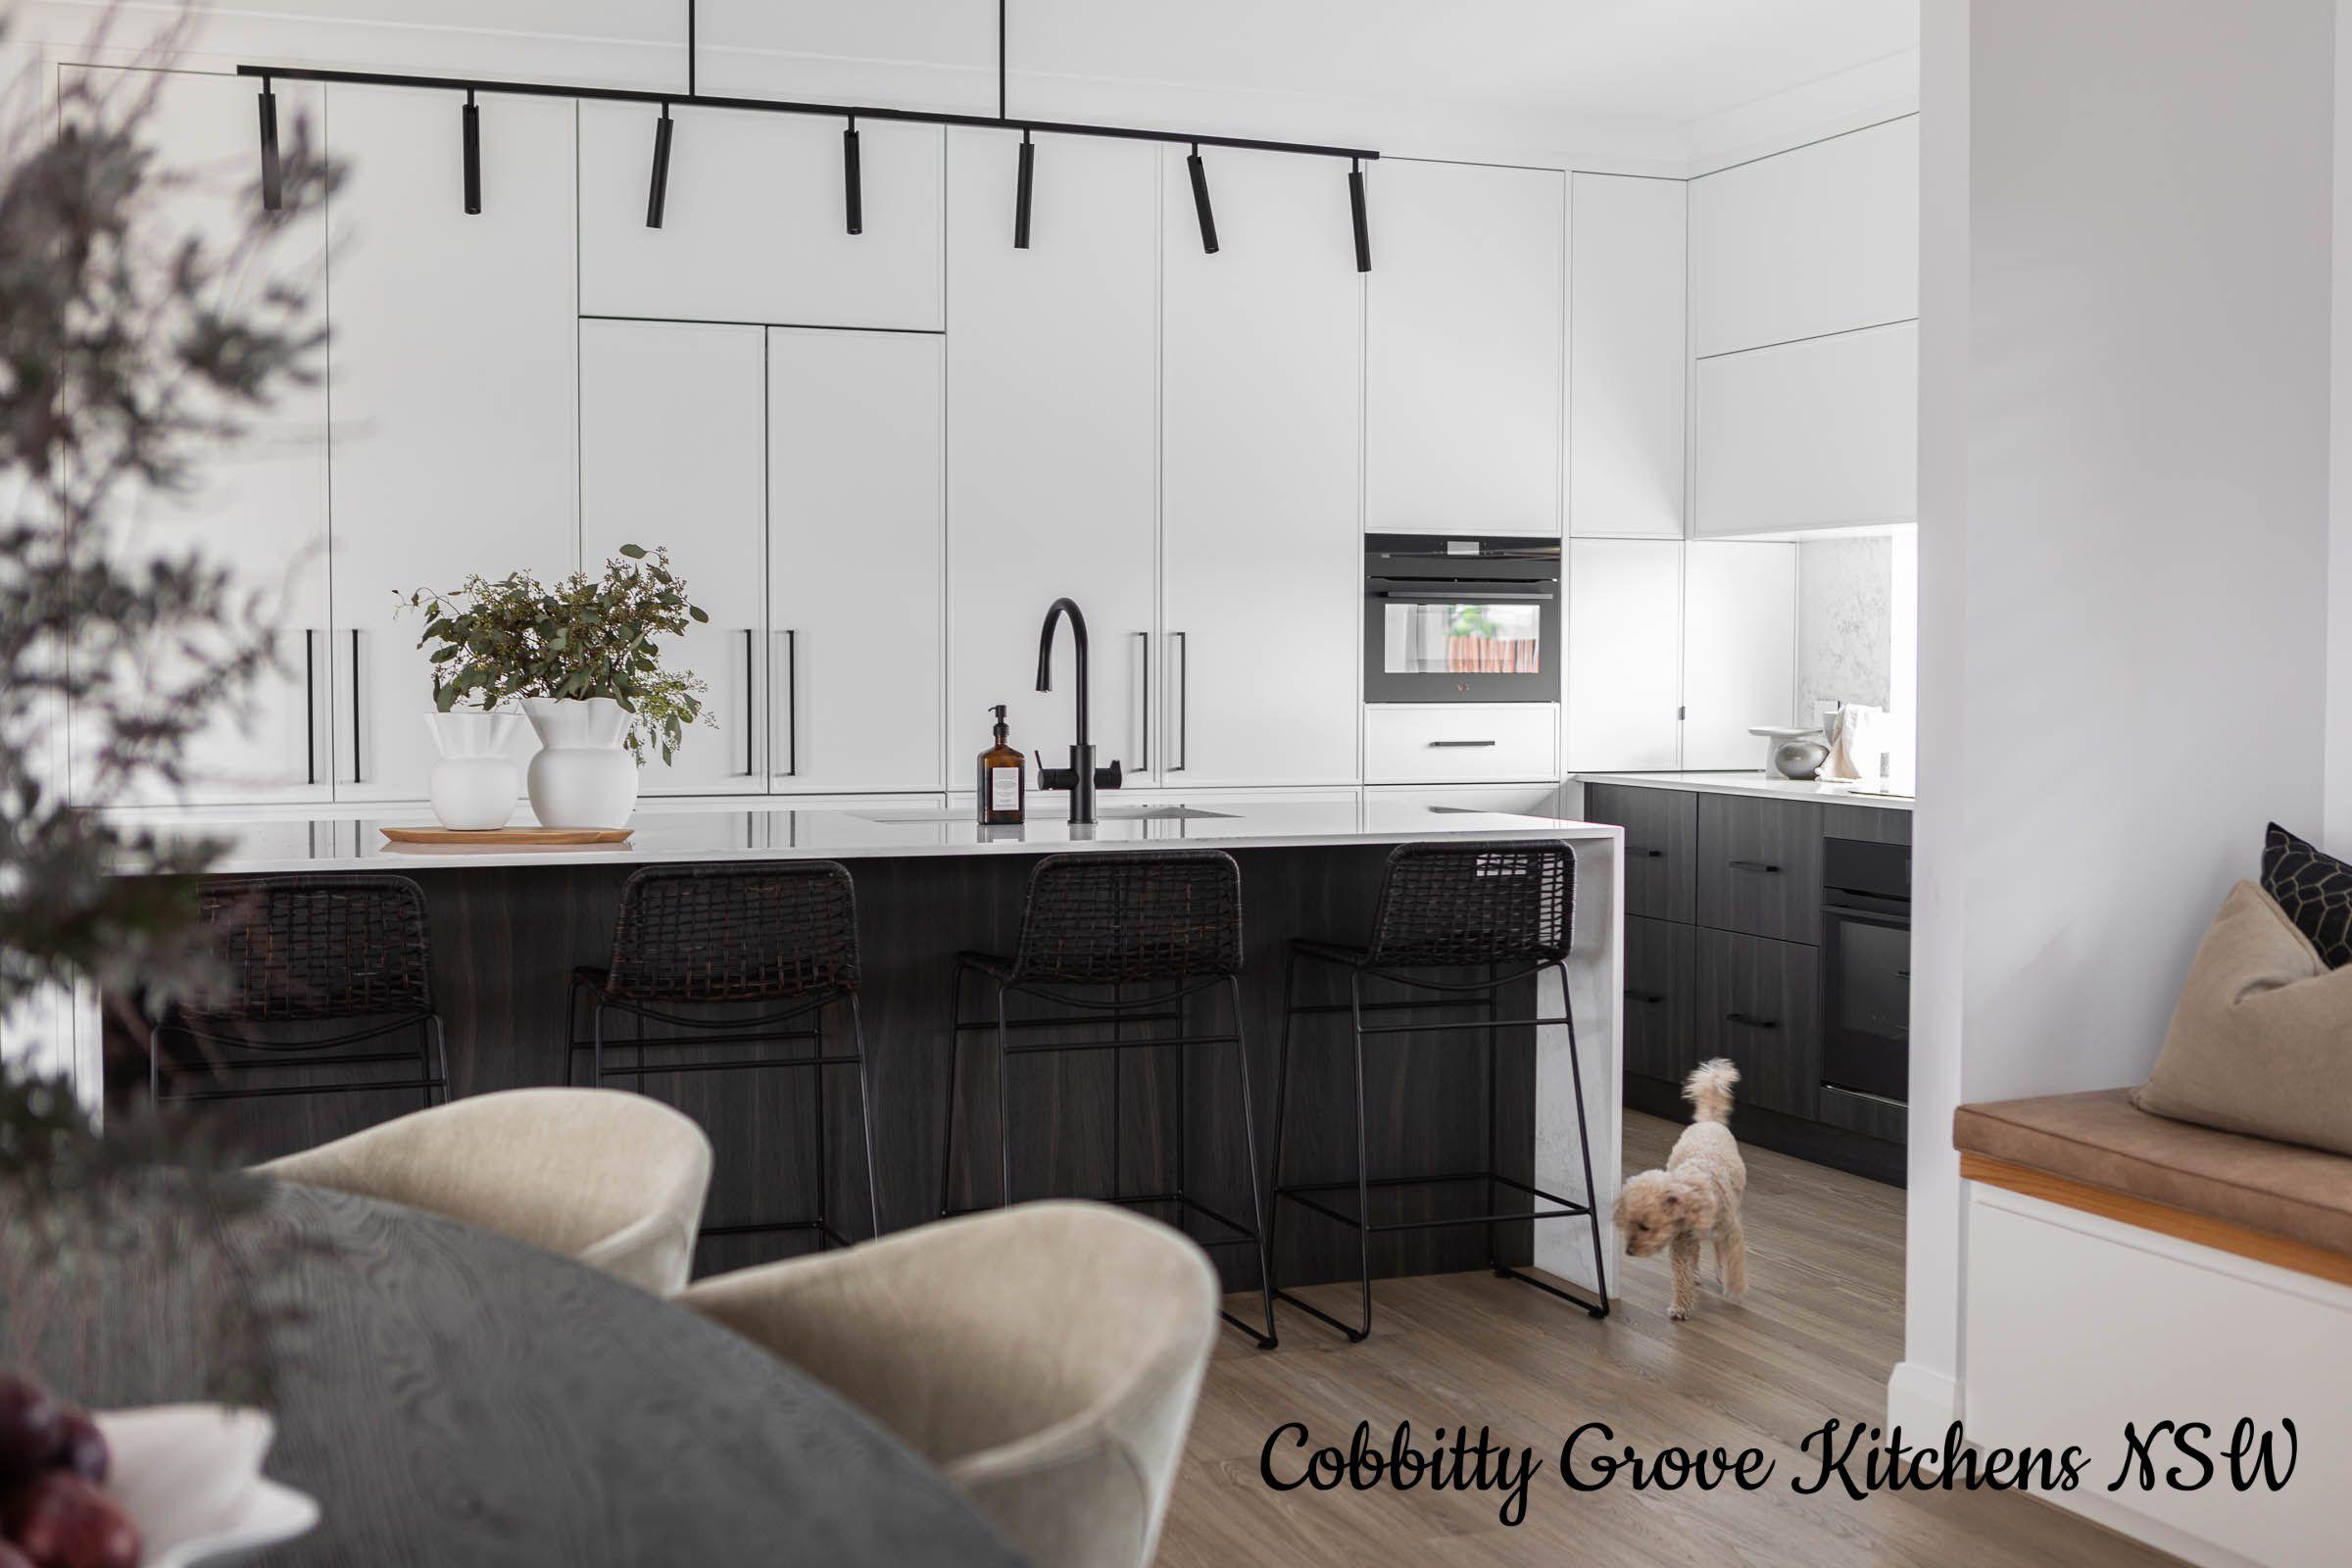 Images Cobbitty Grove Kitchens NSW Pty ltd